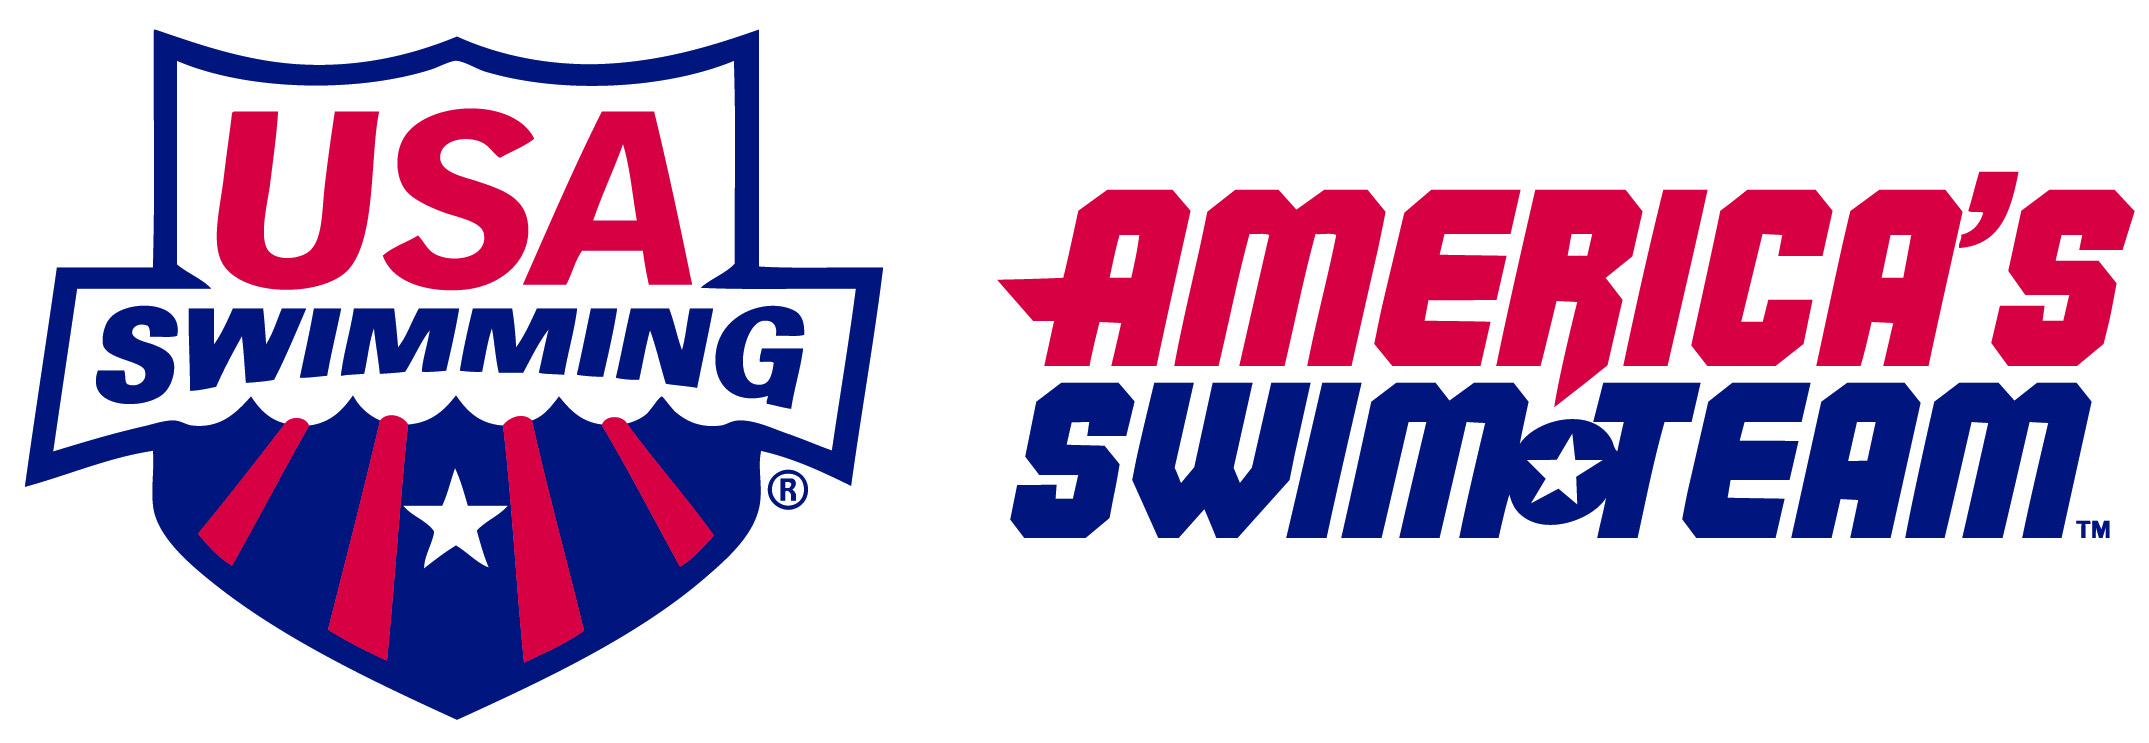 Image Usa Swimming Logo Pc Android iPhone And iPad Wallpaper